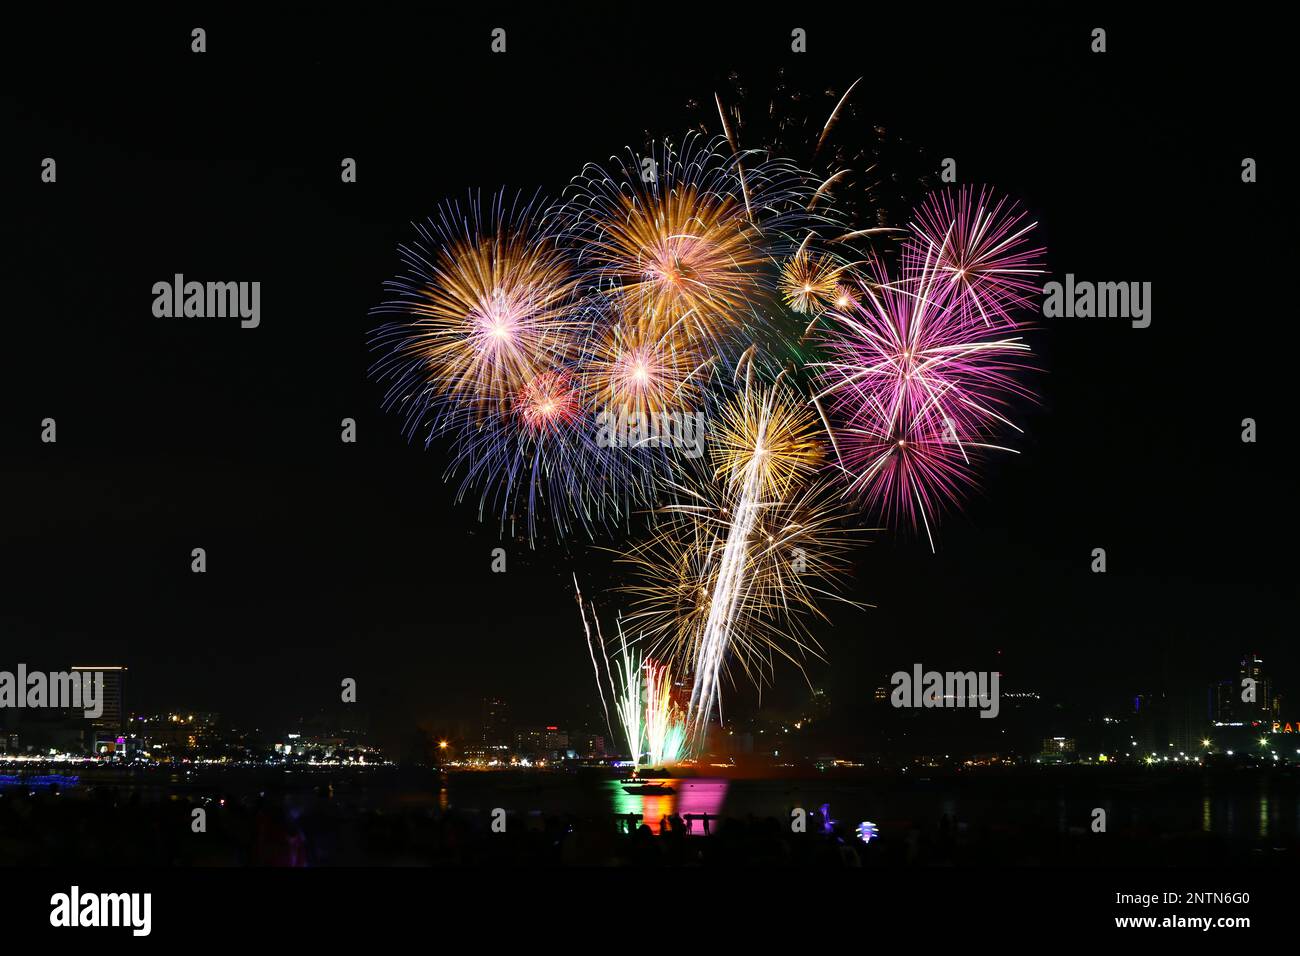 Fireworks show at Pattaya beach, Major attractions of Chonburi Province in Thailand. Stock Photo